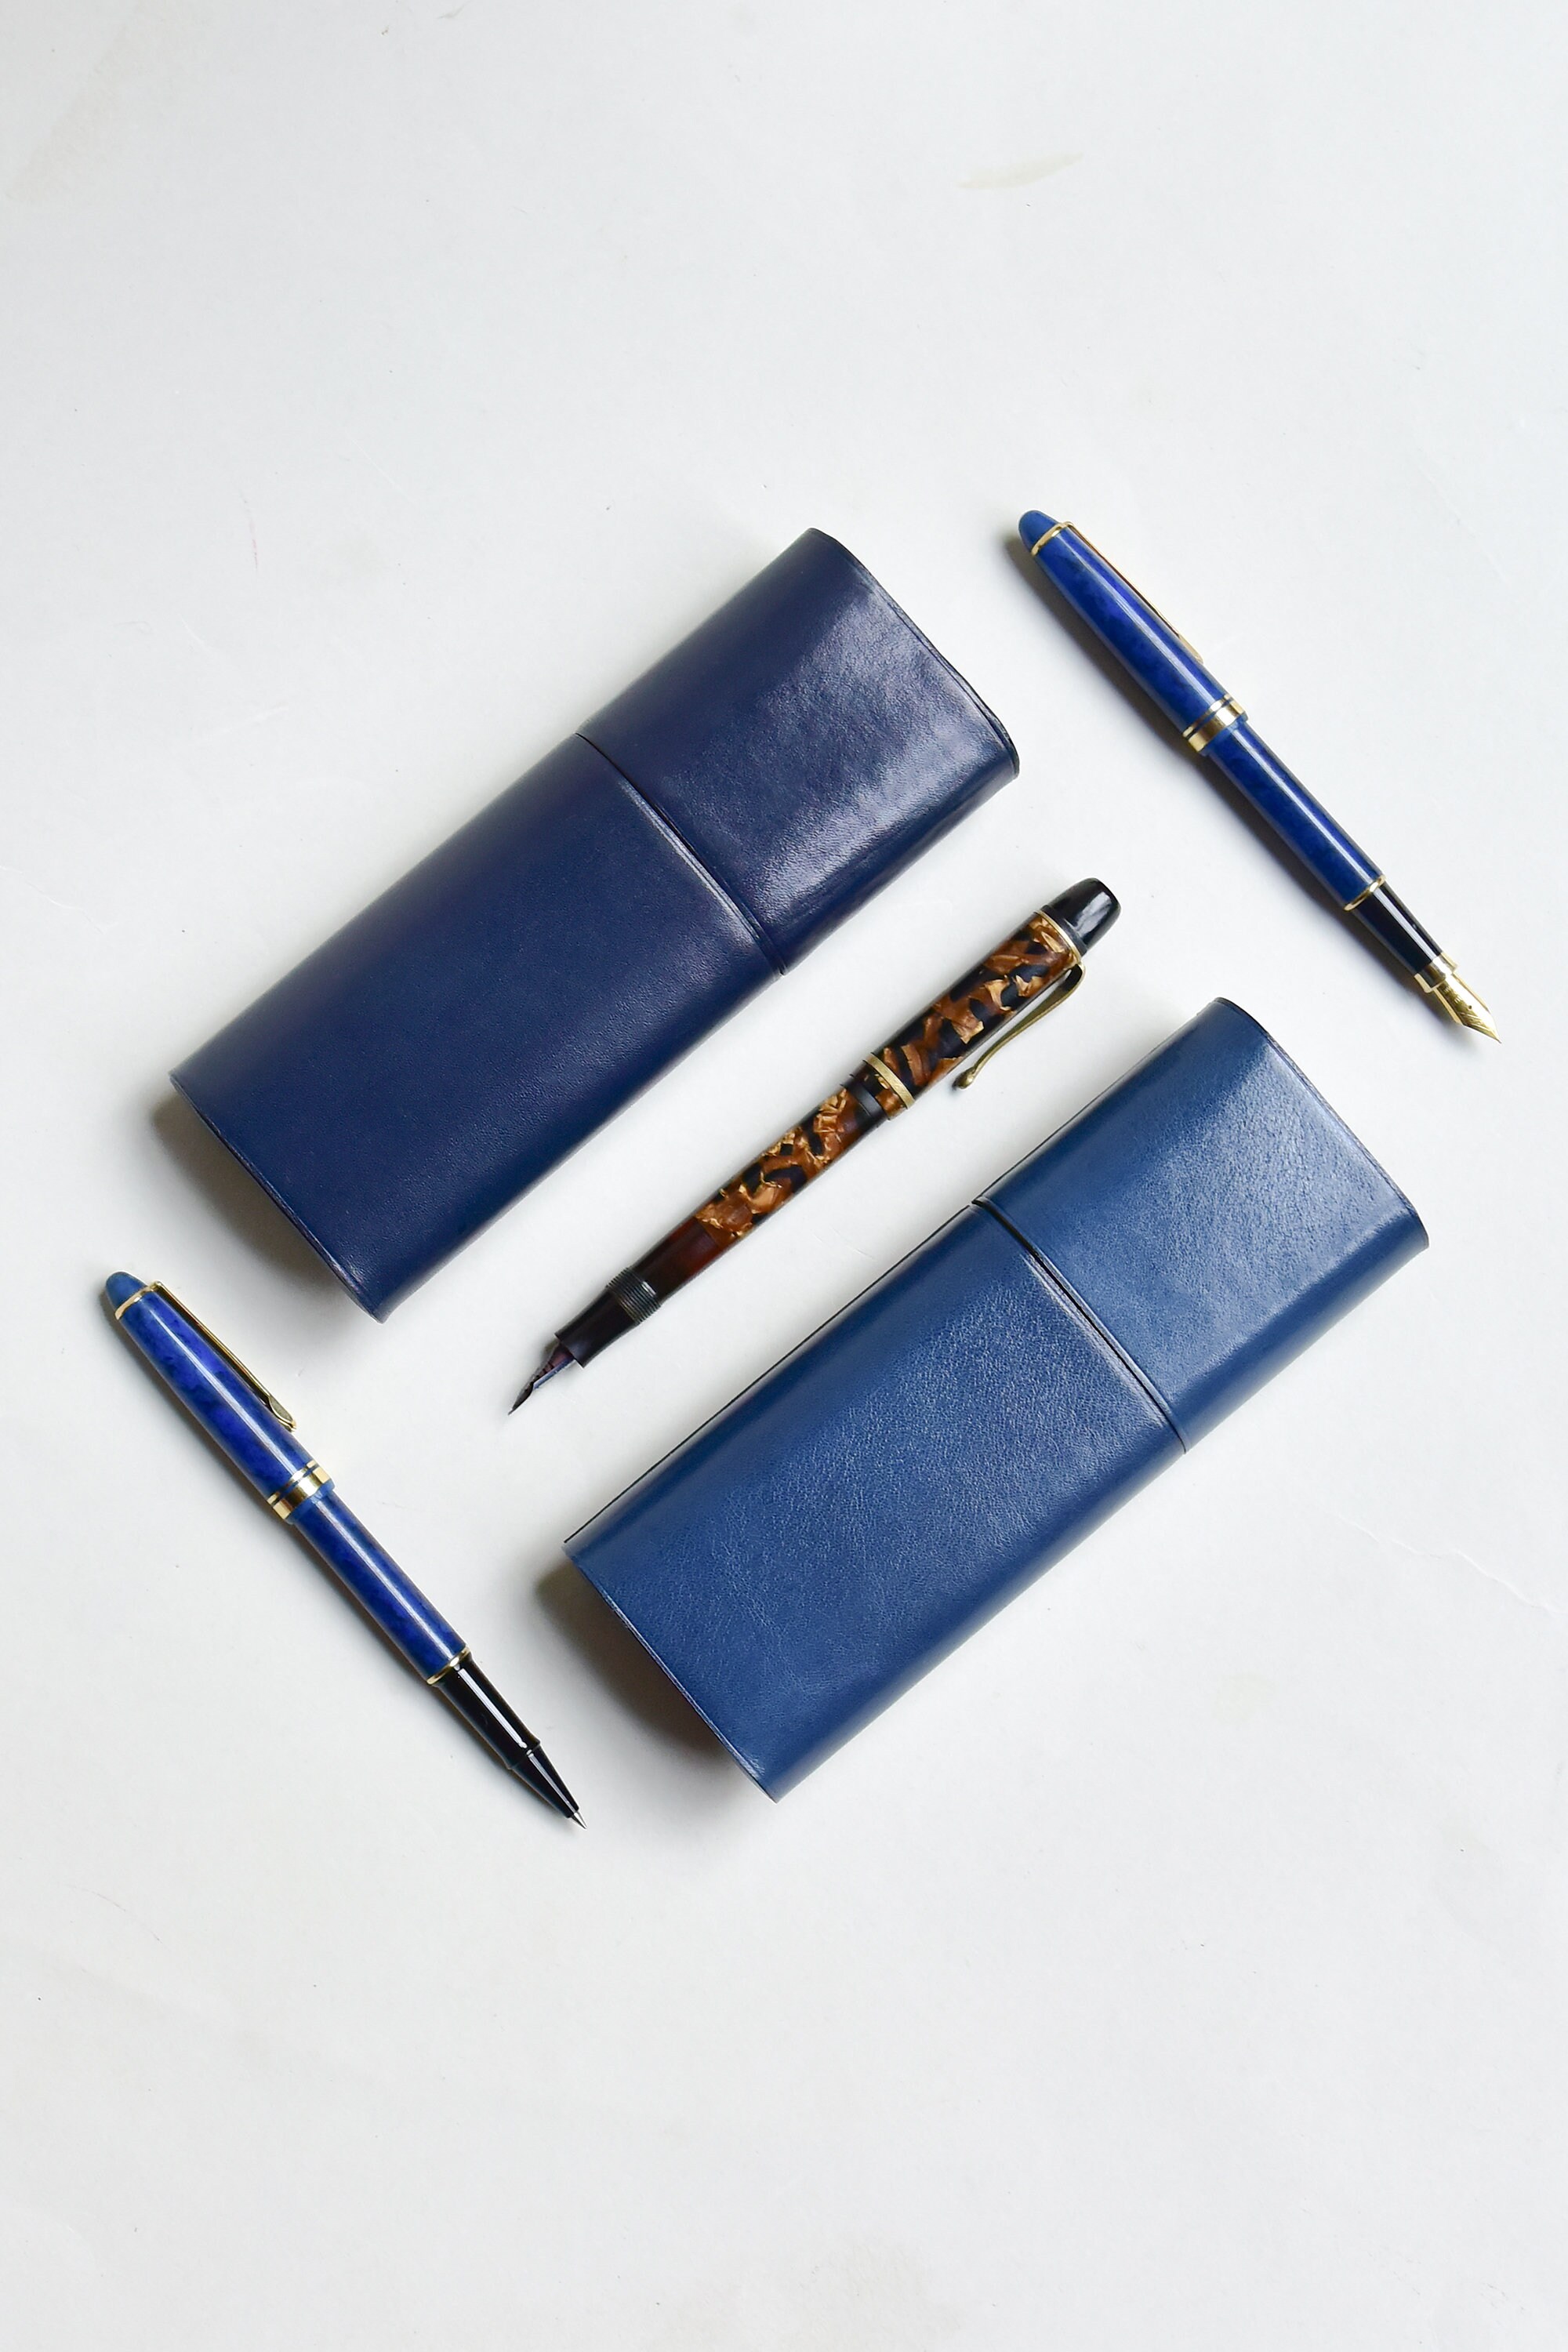 Wholesale Portable Vintage Leather Pen Case With 2 Slots For Fountain And  Ballpoint Pen Set From Huanlingluo, $21.34